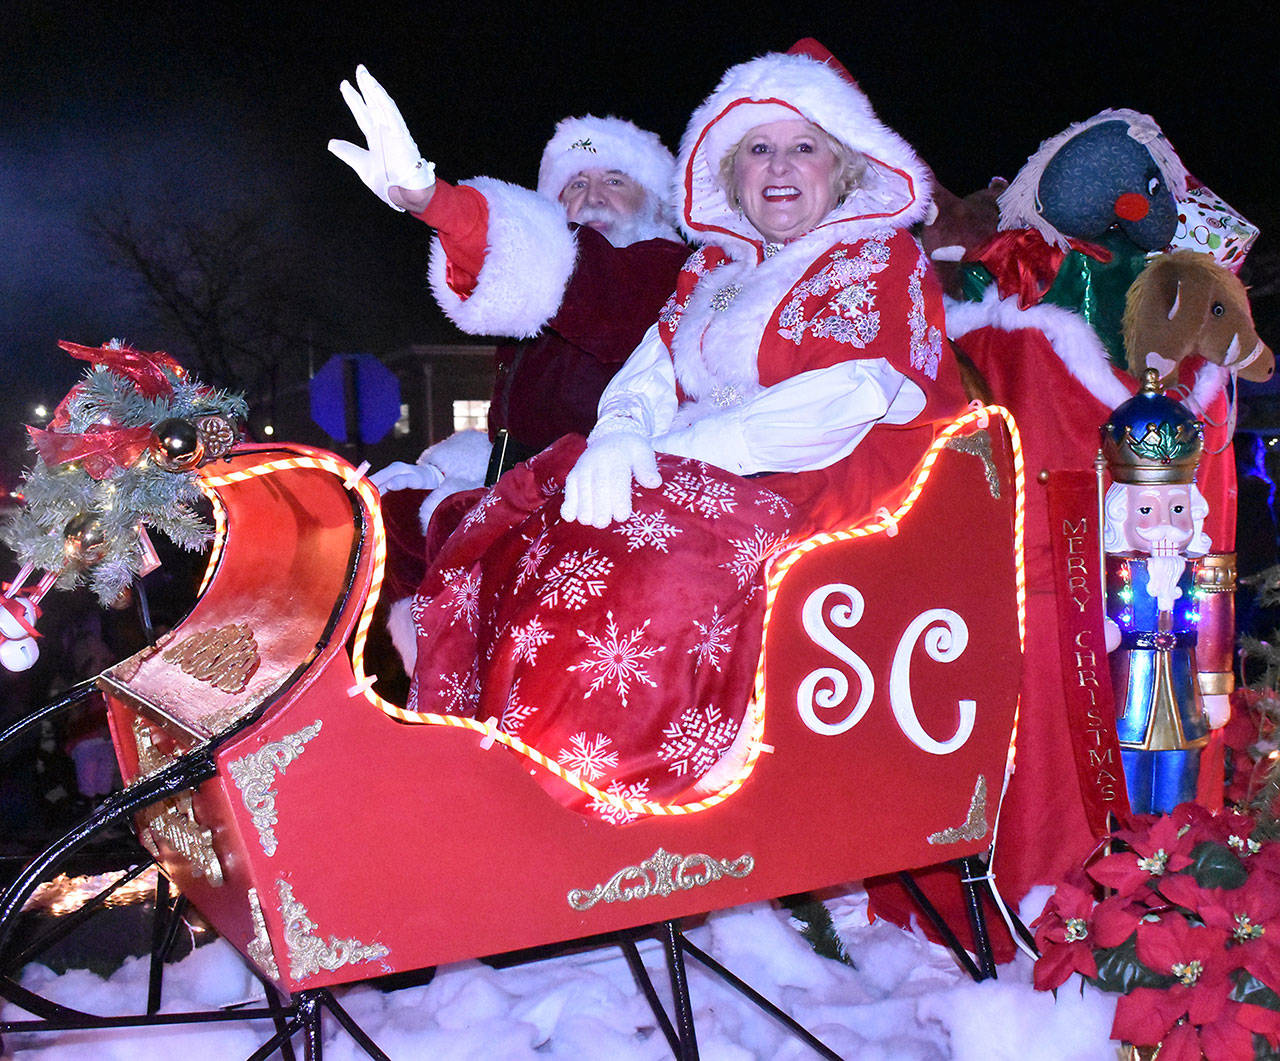 In addition to traveling through Enumclaw and Buckley, Santa will also be at the Enumclaw Expo Center’s Hometown Holiday Parade Dec. 4 - 6, in place of being a part of the normal Enumclaw holiday parade. File photo